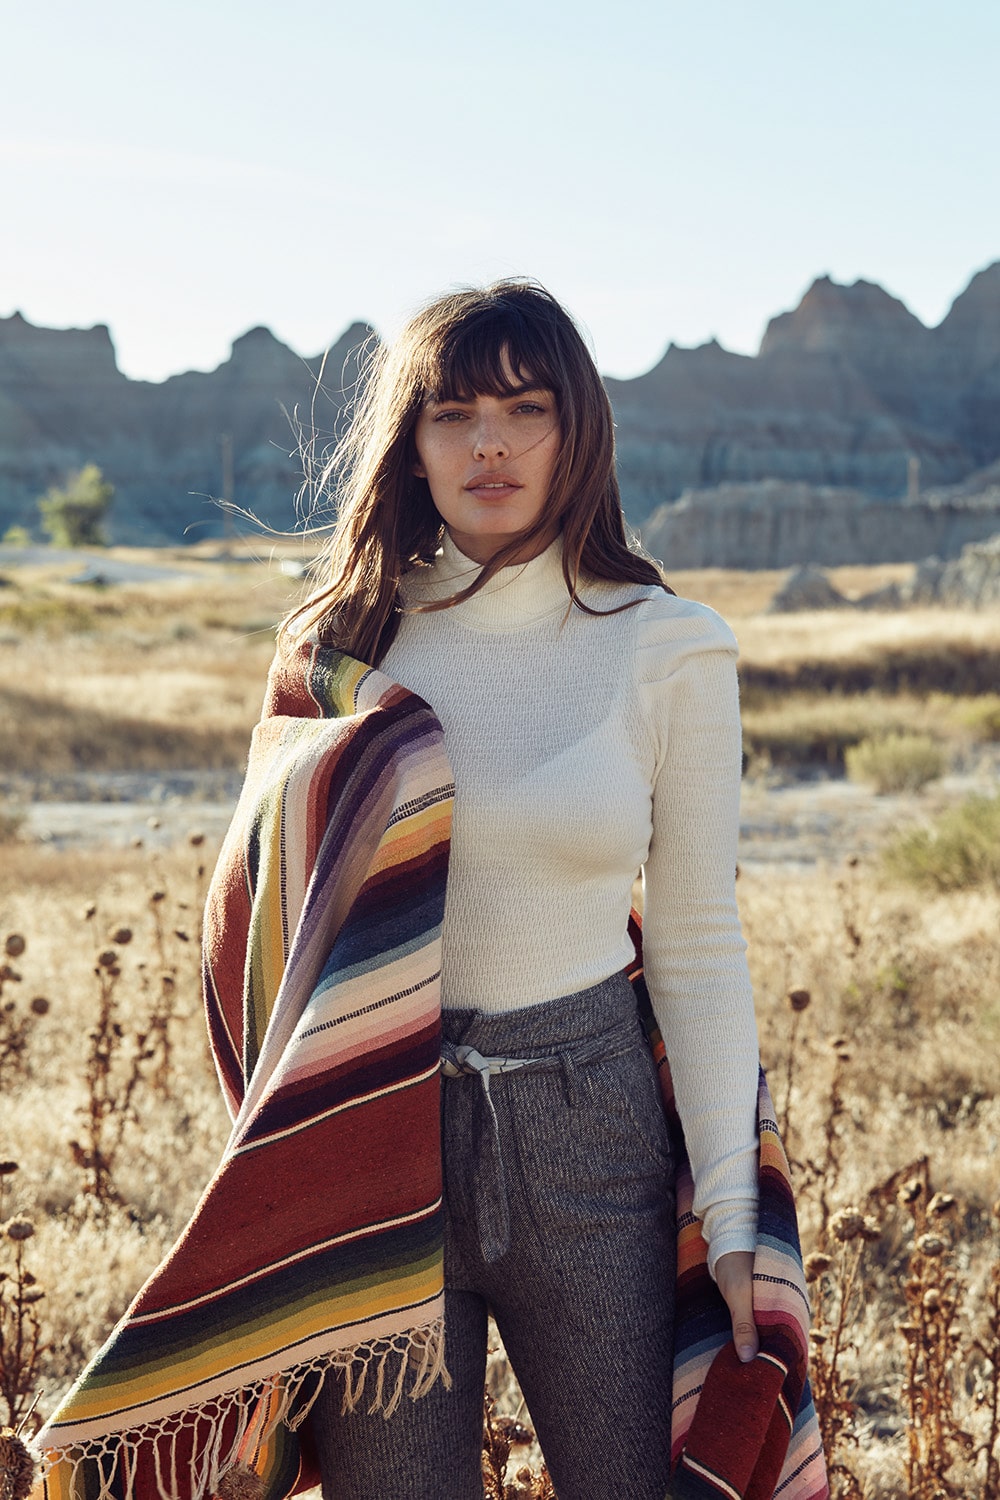 Free People X National Park Foundation Fall 2017 Alyssa Miller by Harper Smith